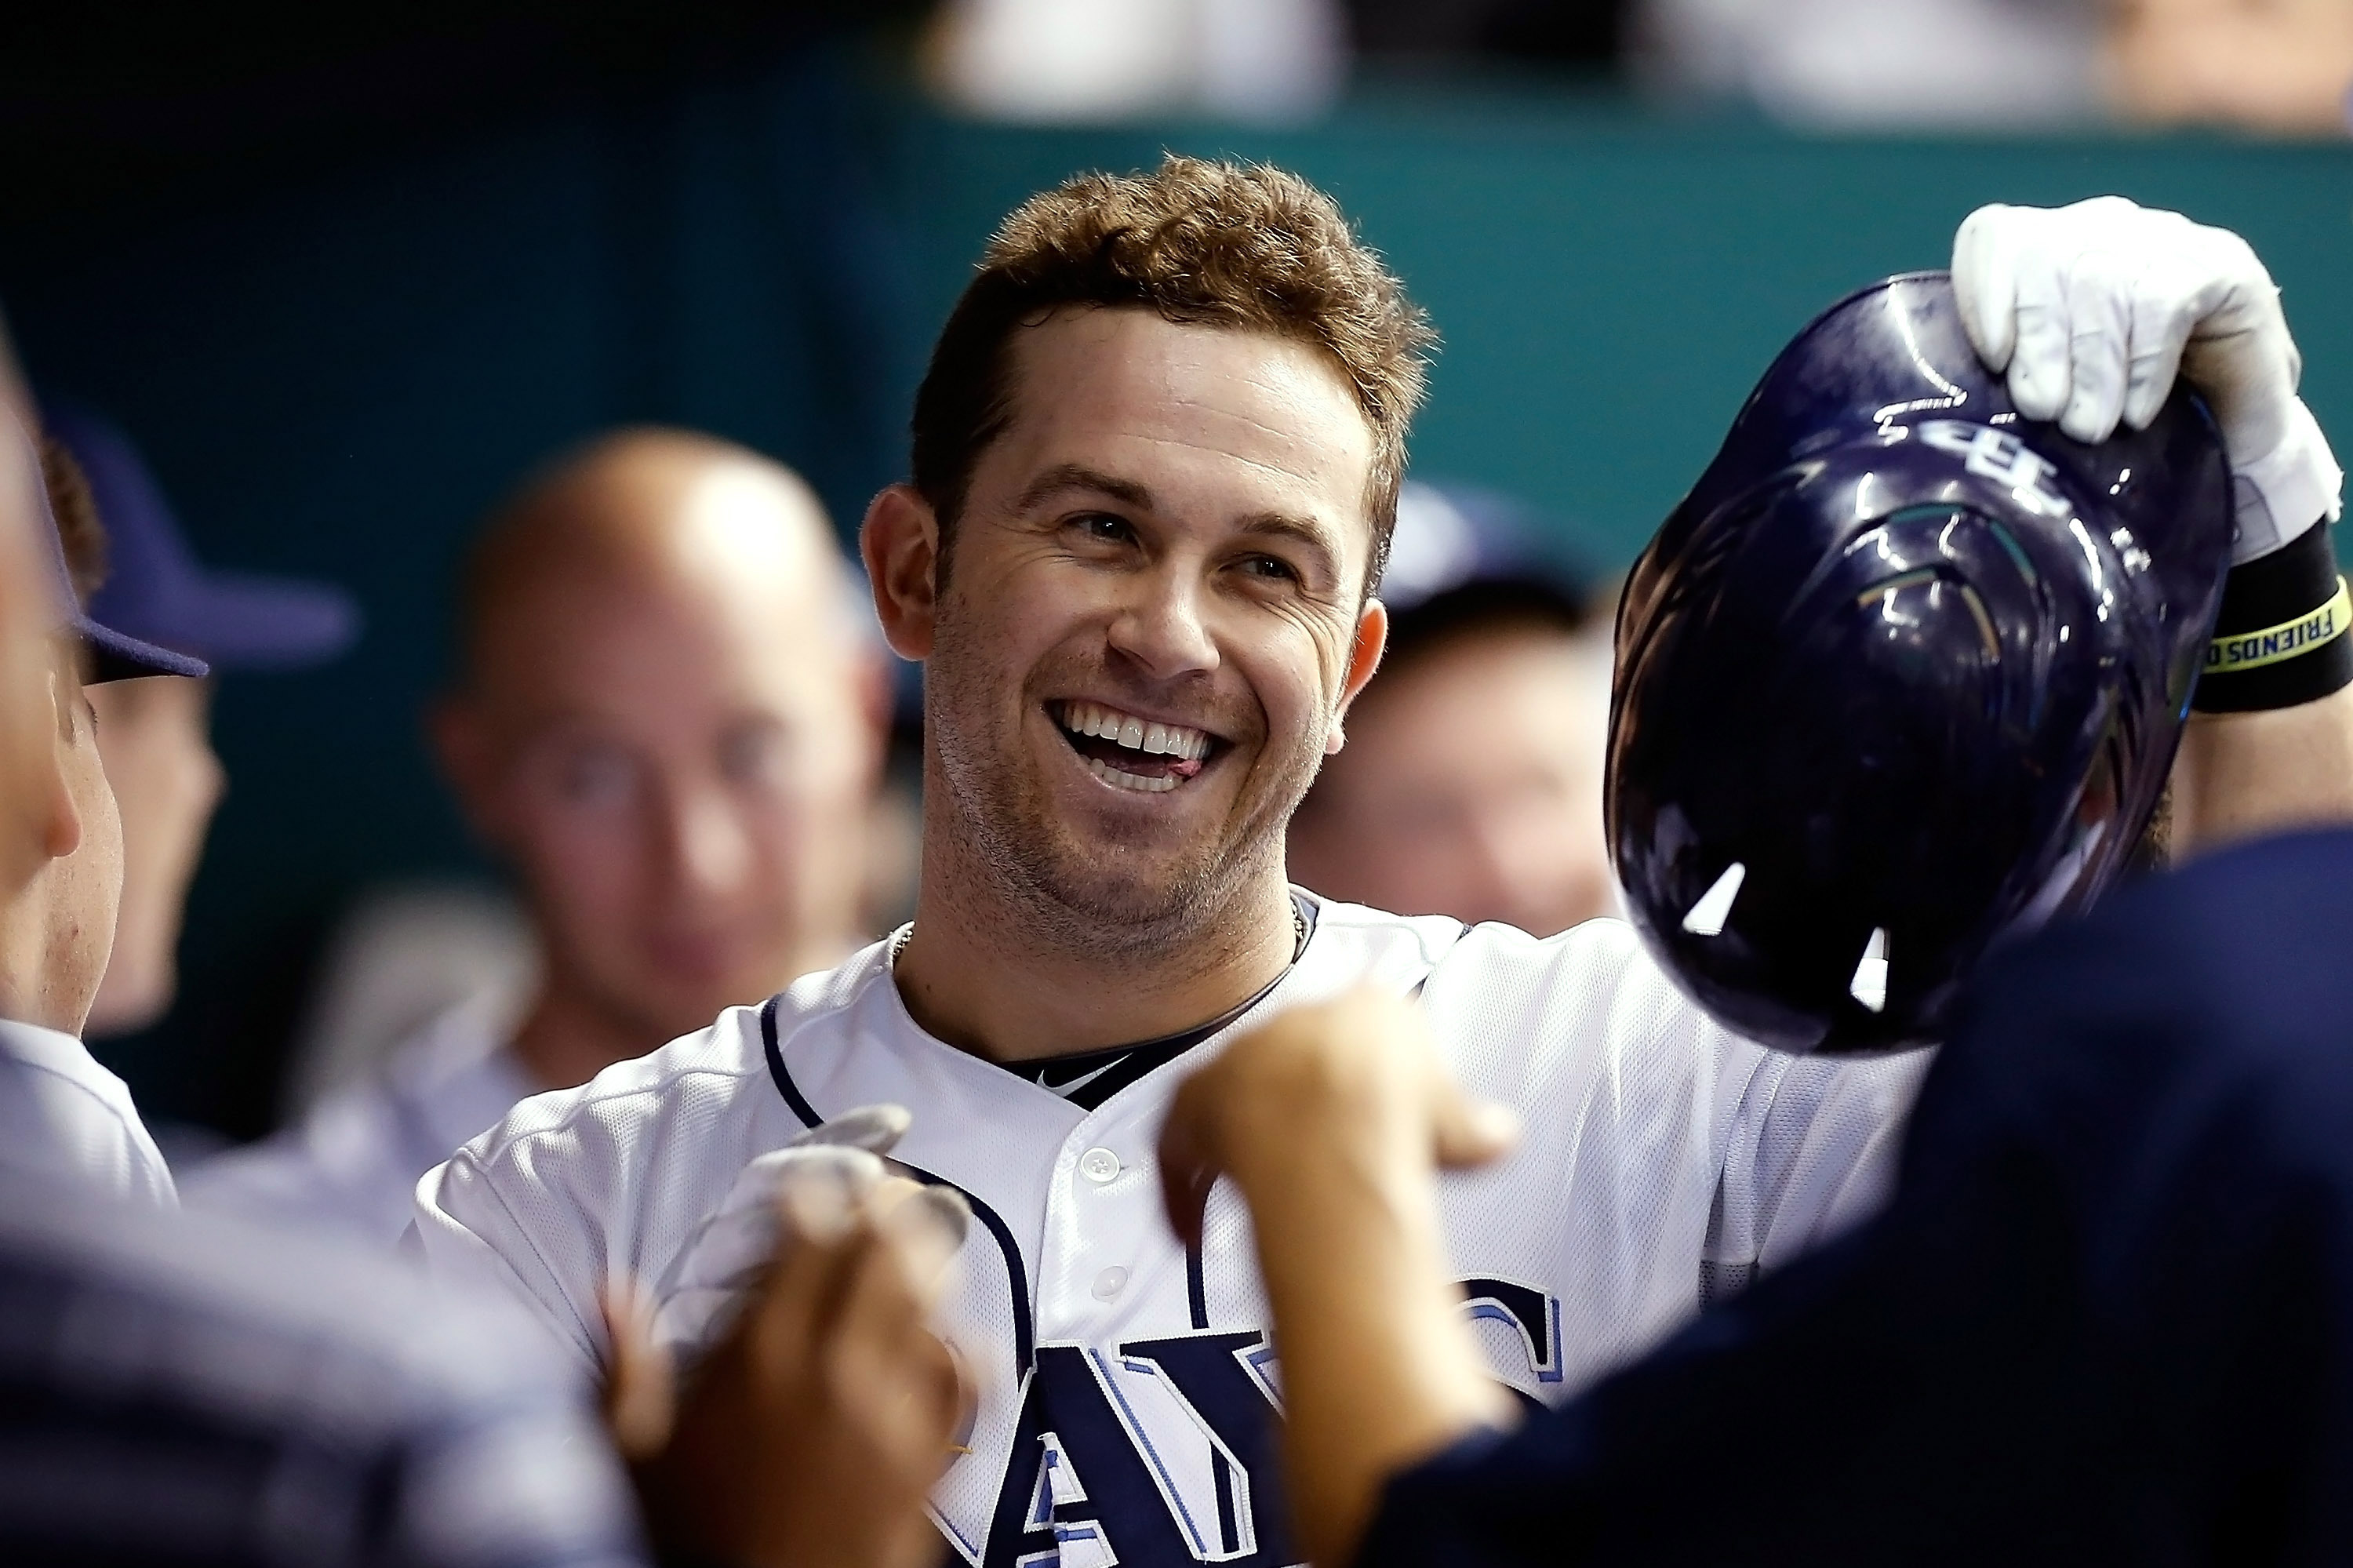 Rays Lock Up Longoria for $100 Million … and They're Just Getting